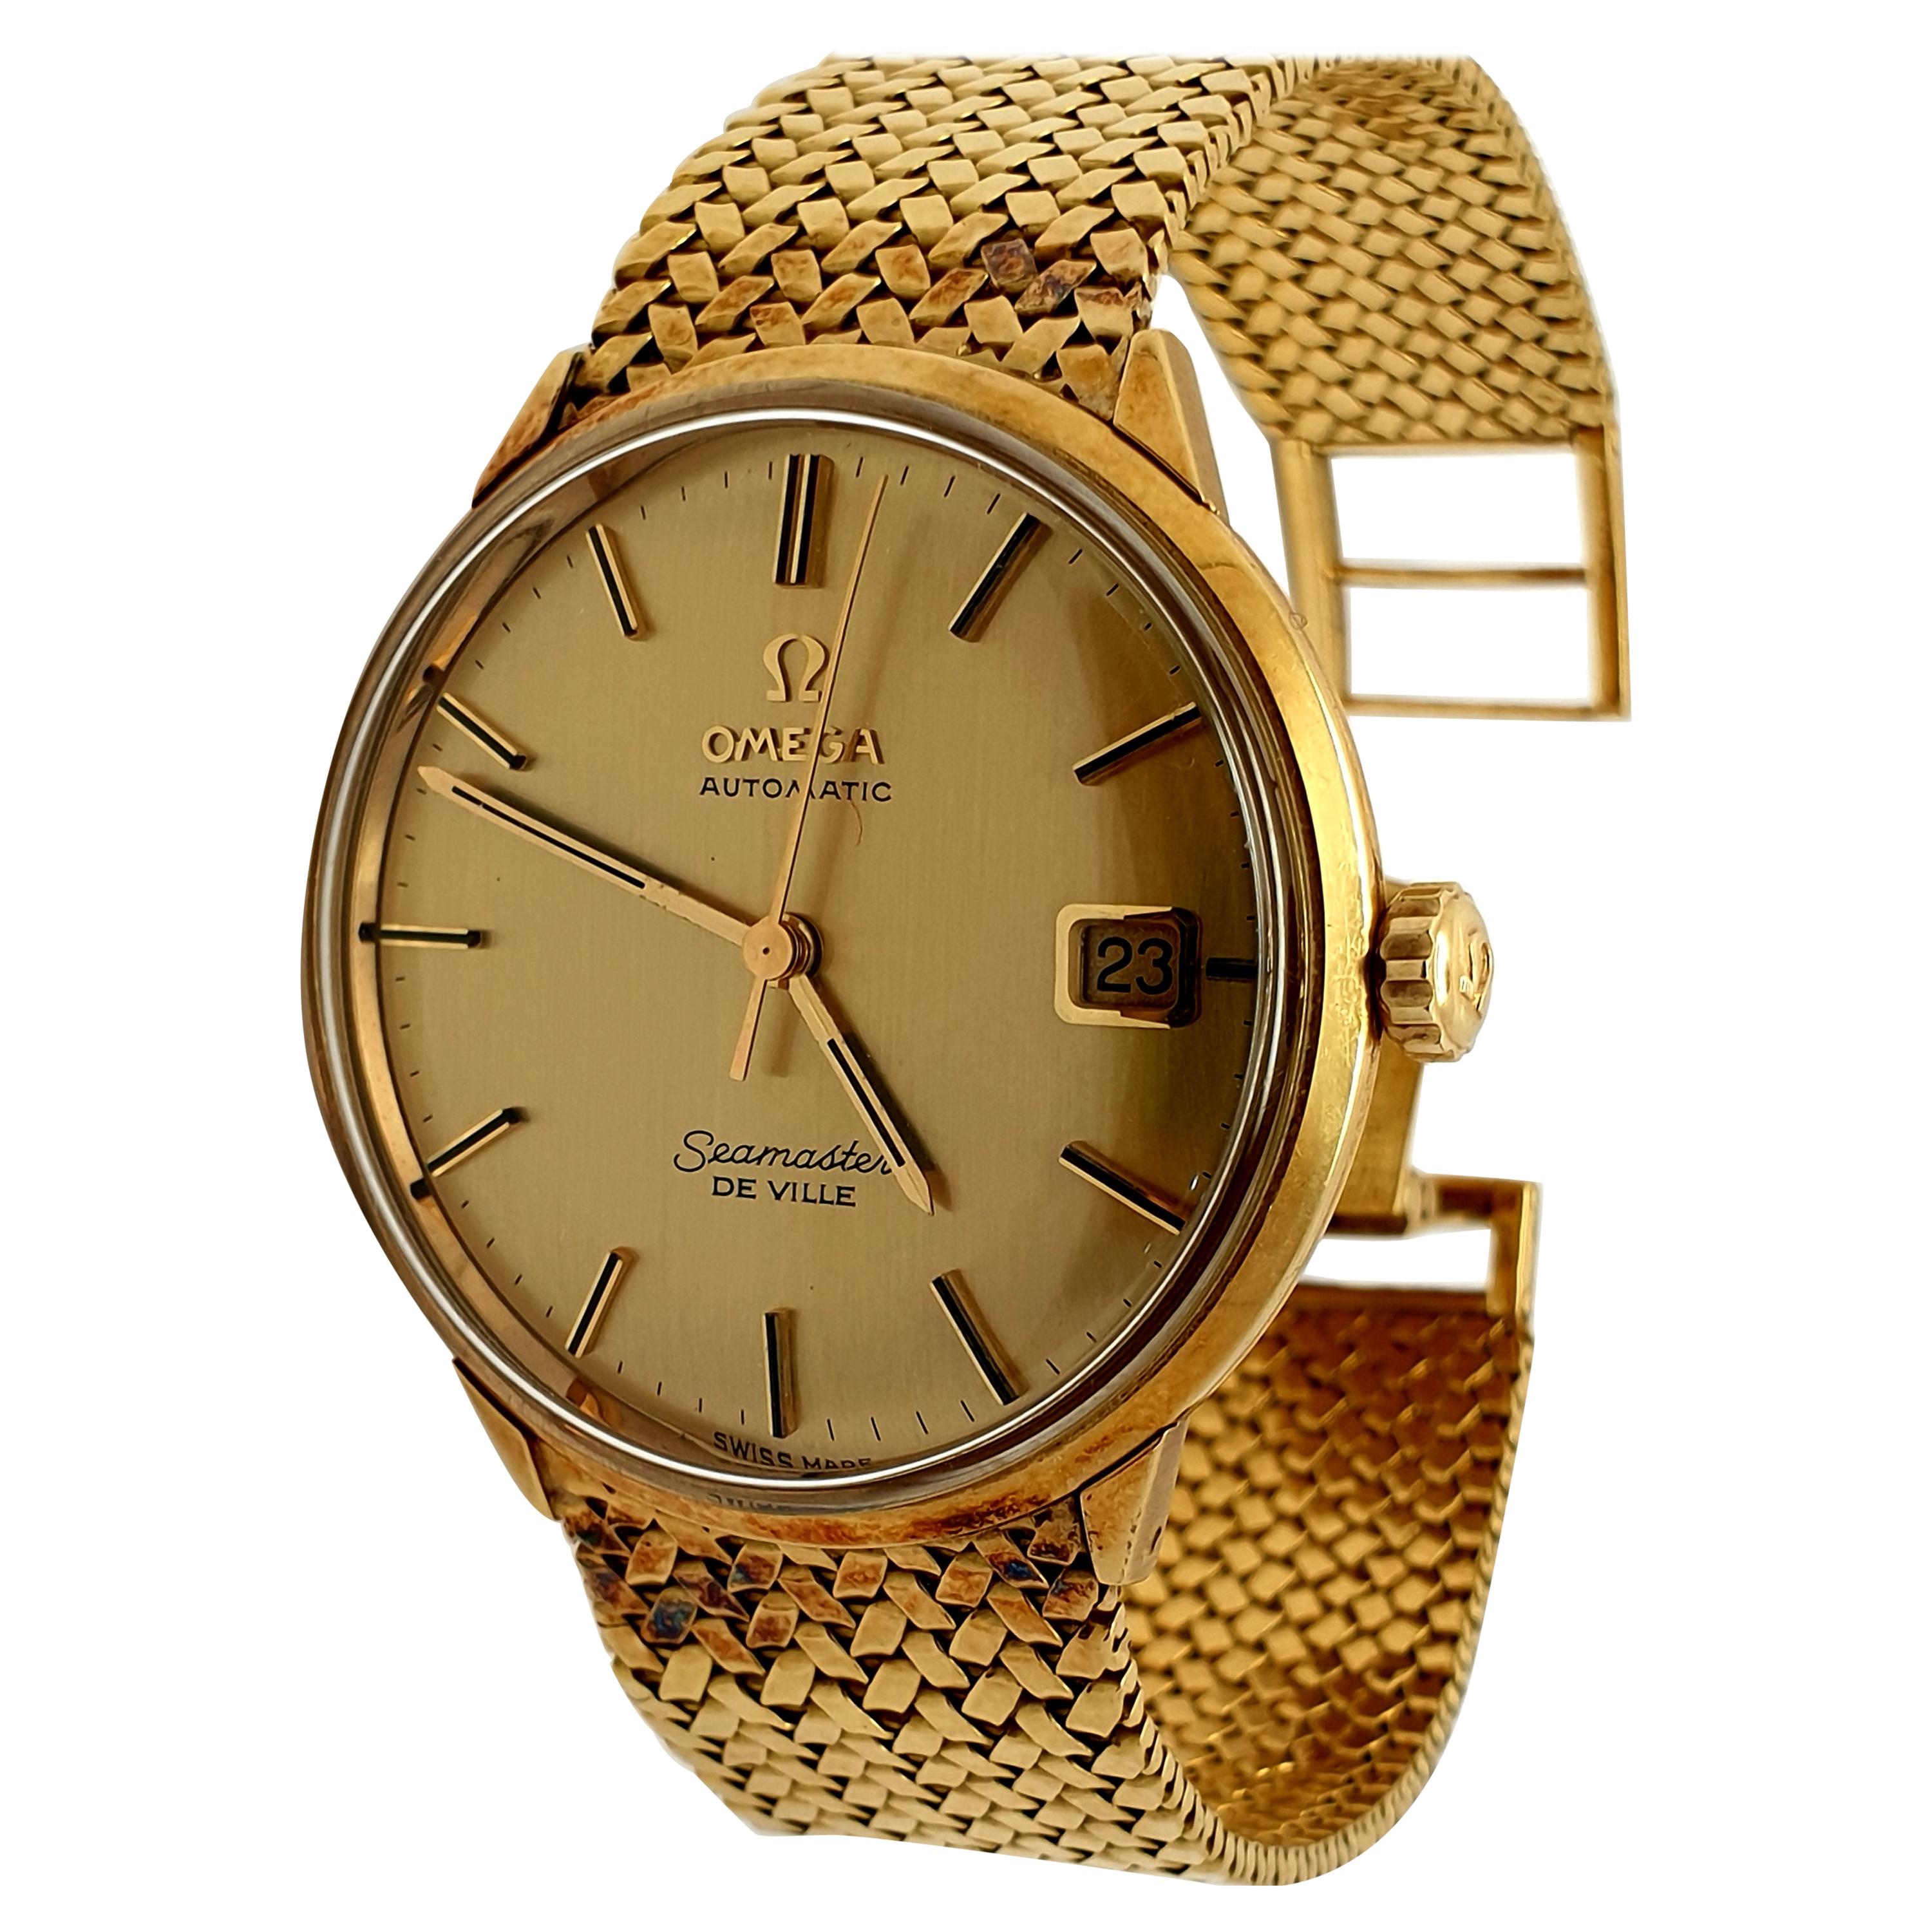 vintage gold omega automatic watch